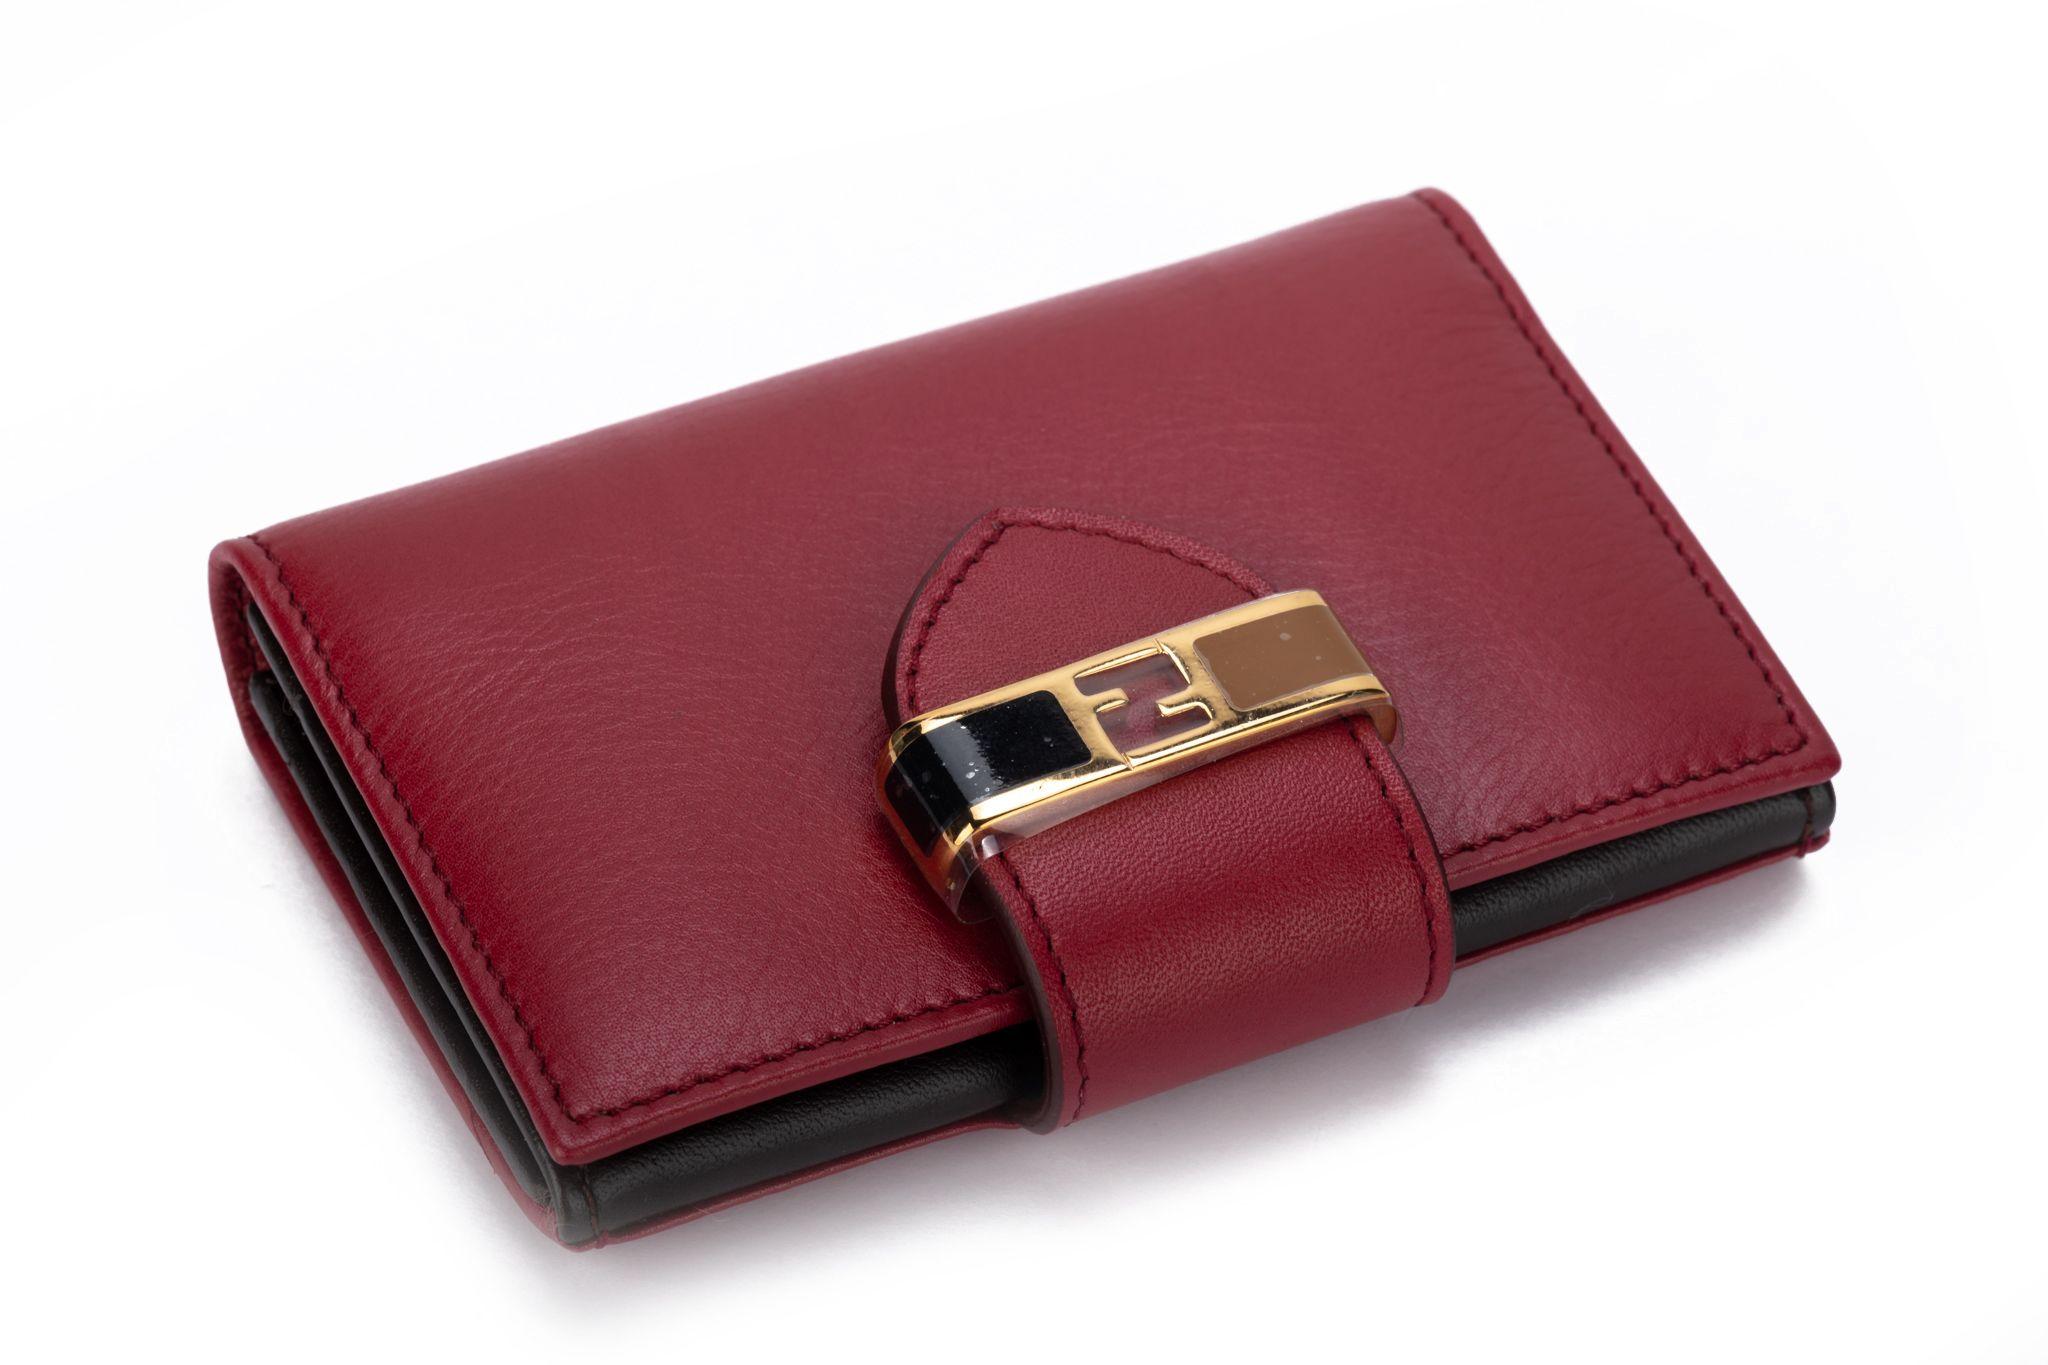 Fendi new burgundy veal wallet with enamel and gold hardware .
Box and original dustcover.